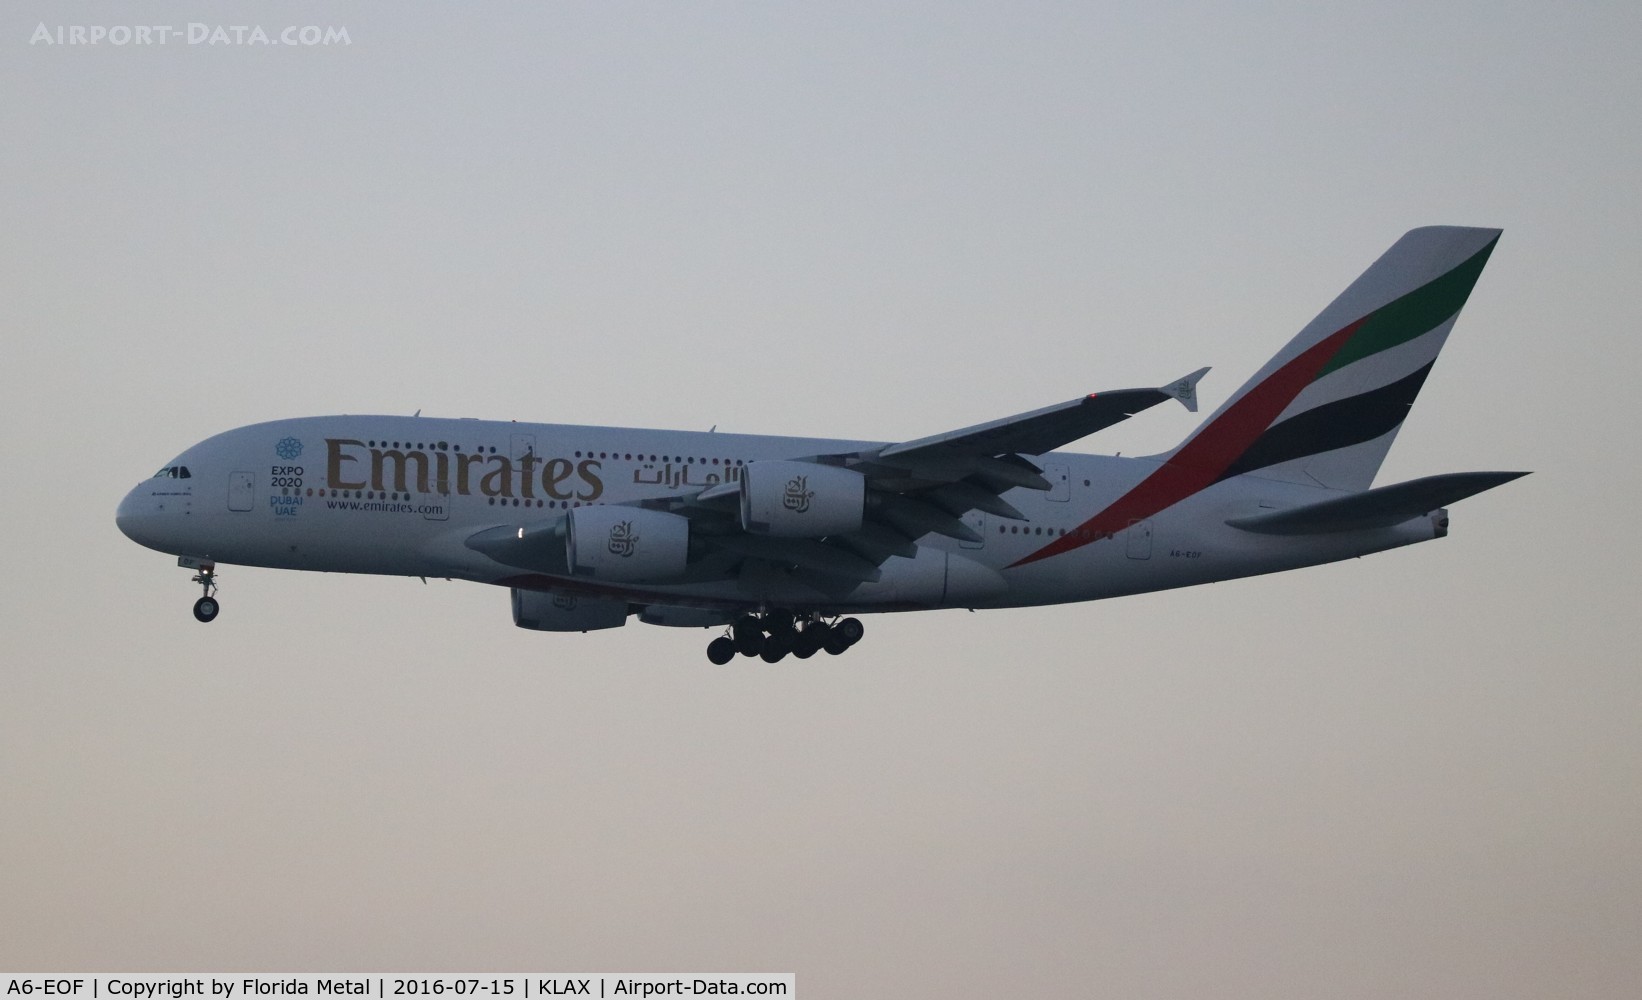 A6-EOF, 2014 Airbus A380-861 C/N 171, Emirates A380 zx